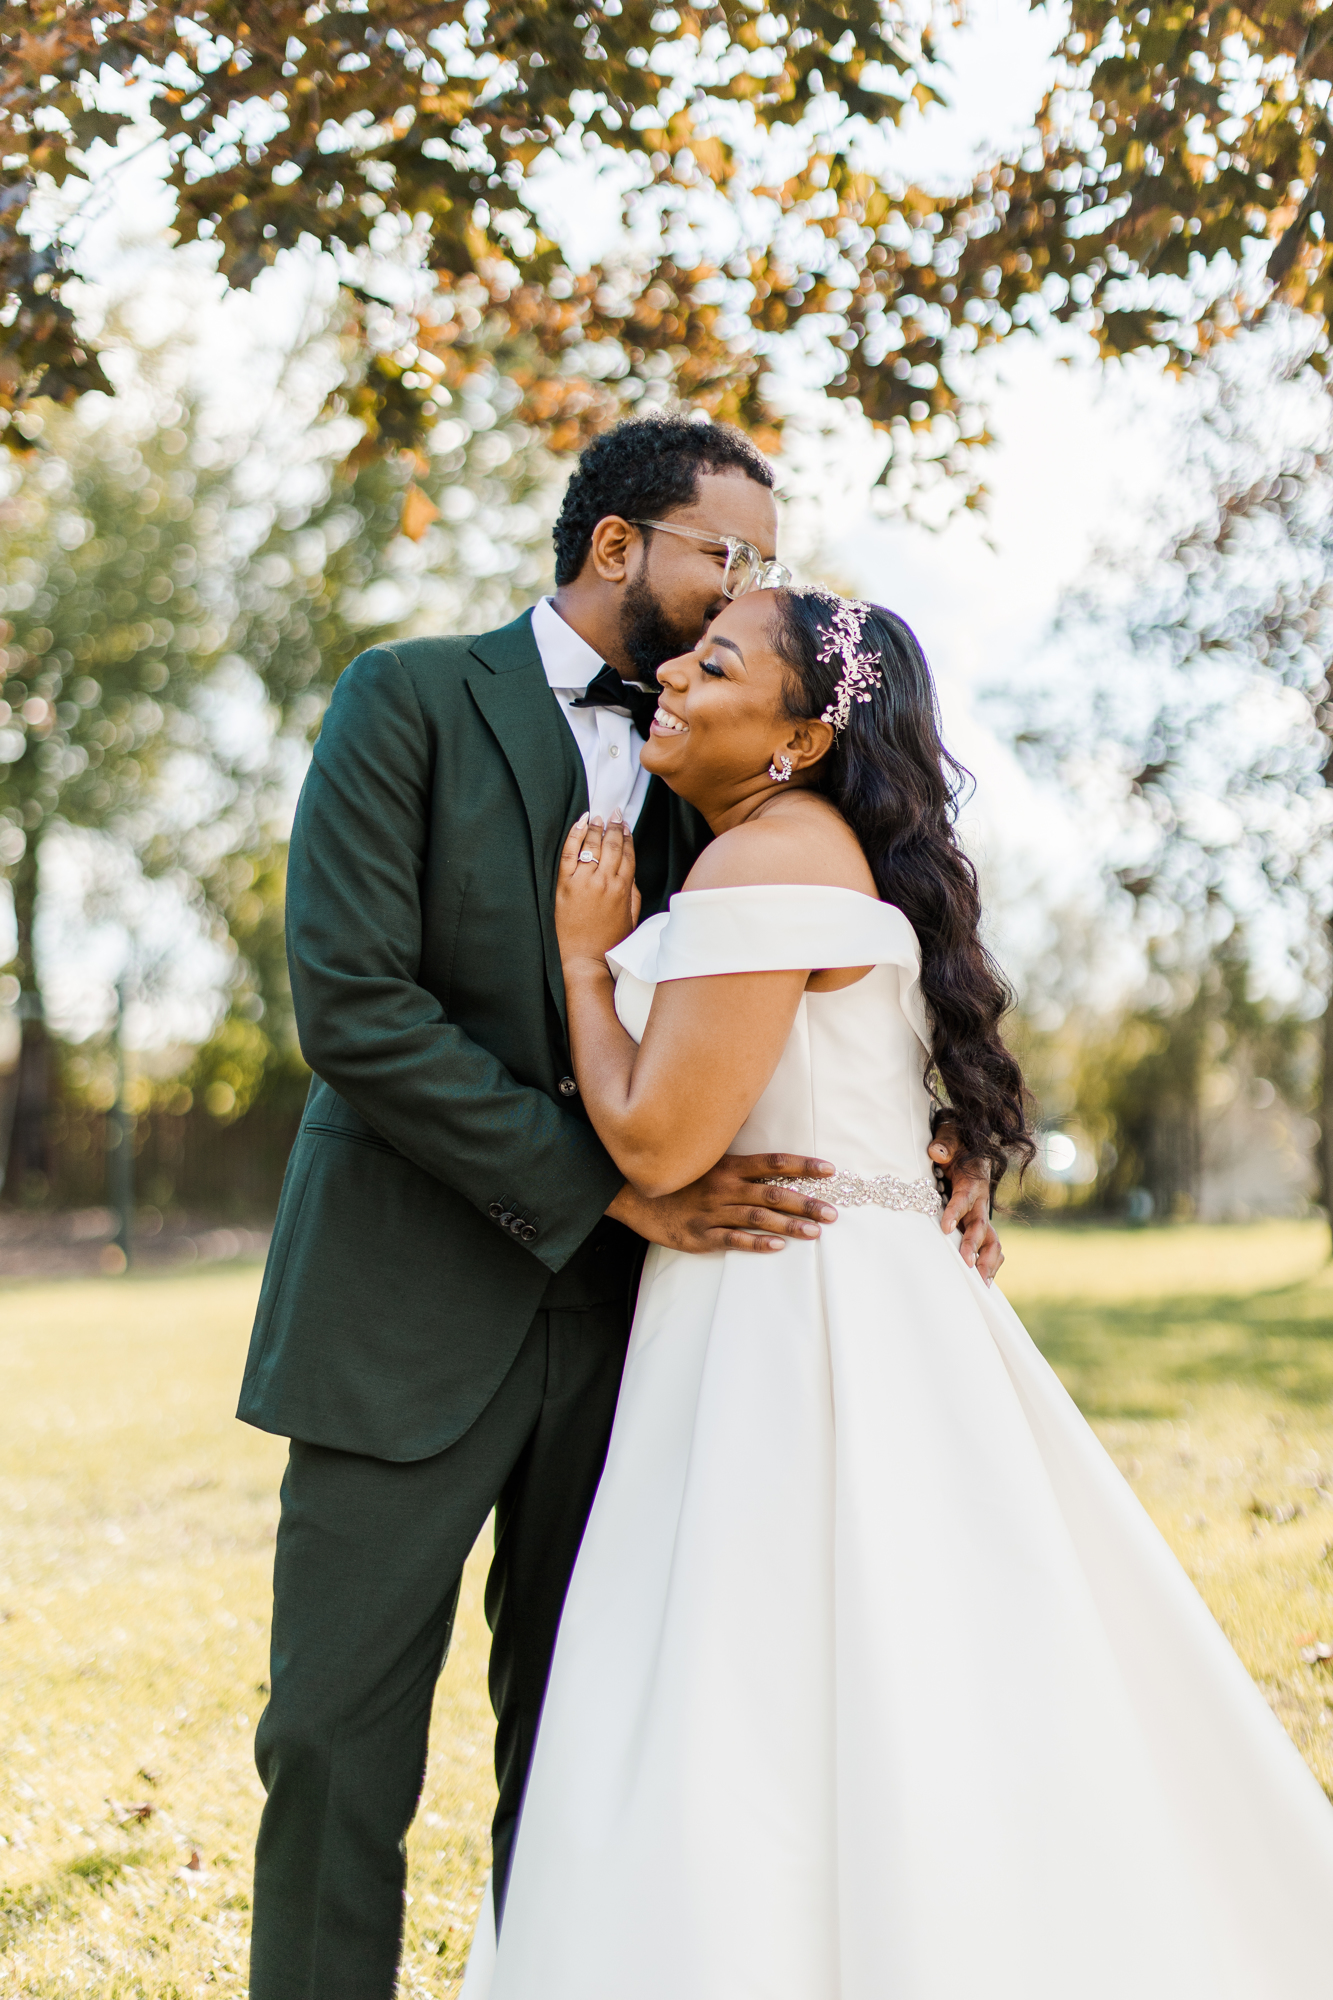 Magical New Jersey Wedding Photos at Edgewood Country Club in Fall